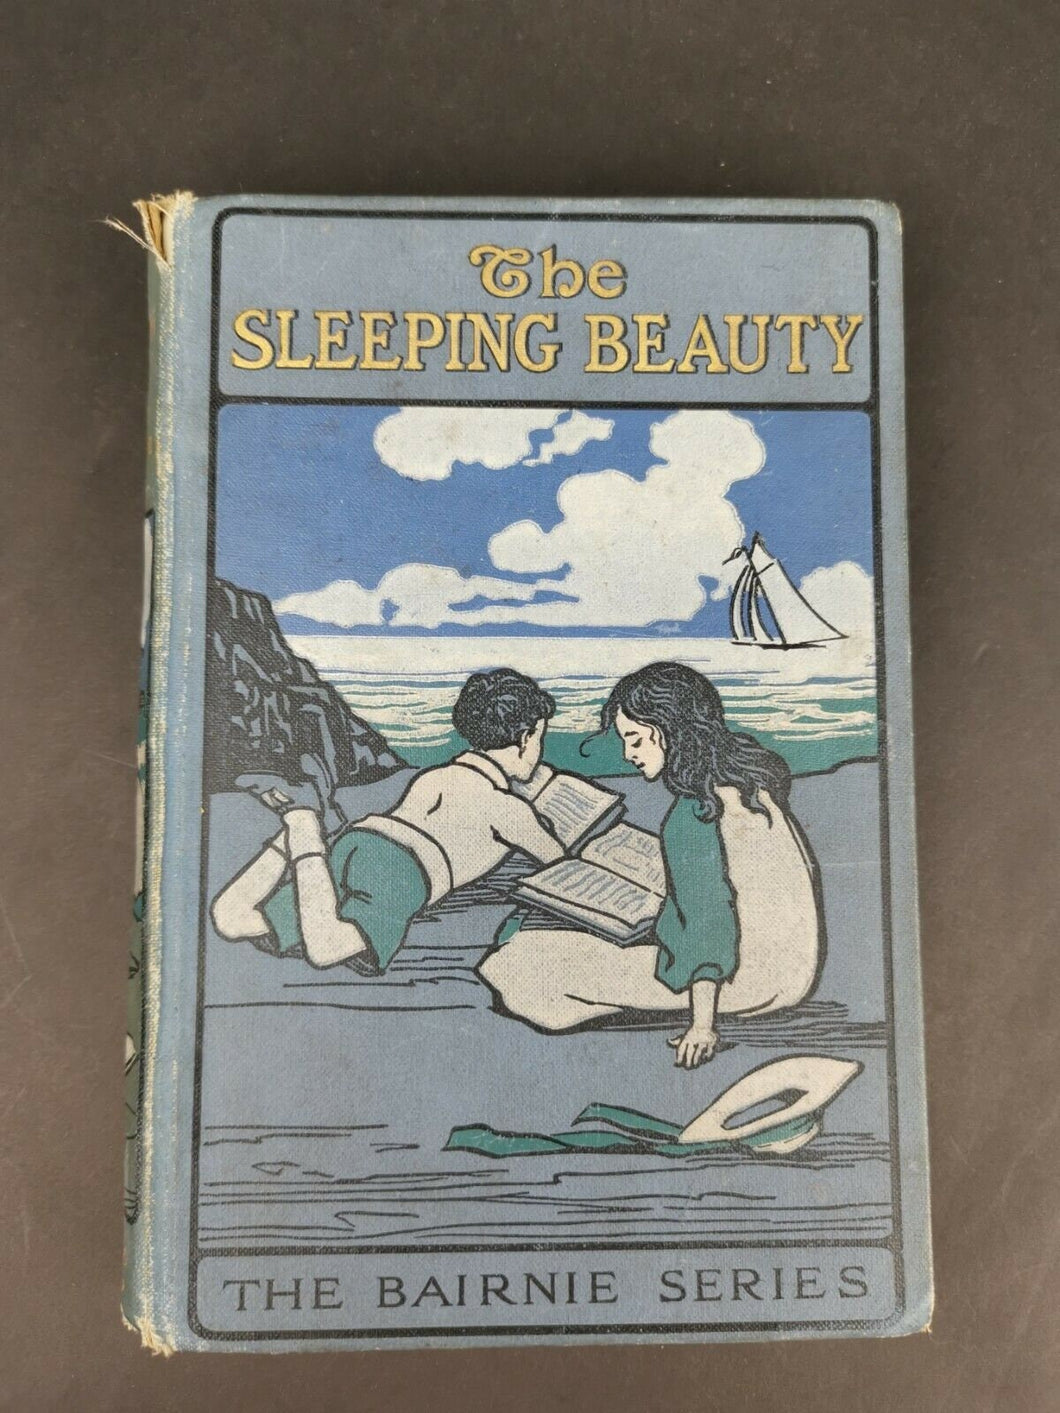 Antique The Sleeping Beauty Book by Martha Baker Dunn A Modern Version 1900 Illustrated by Etheldred B. Barry